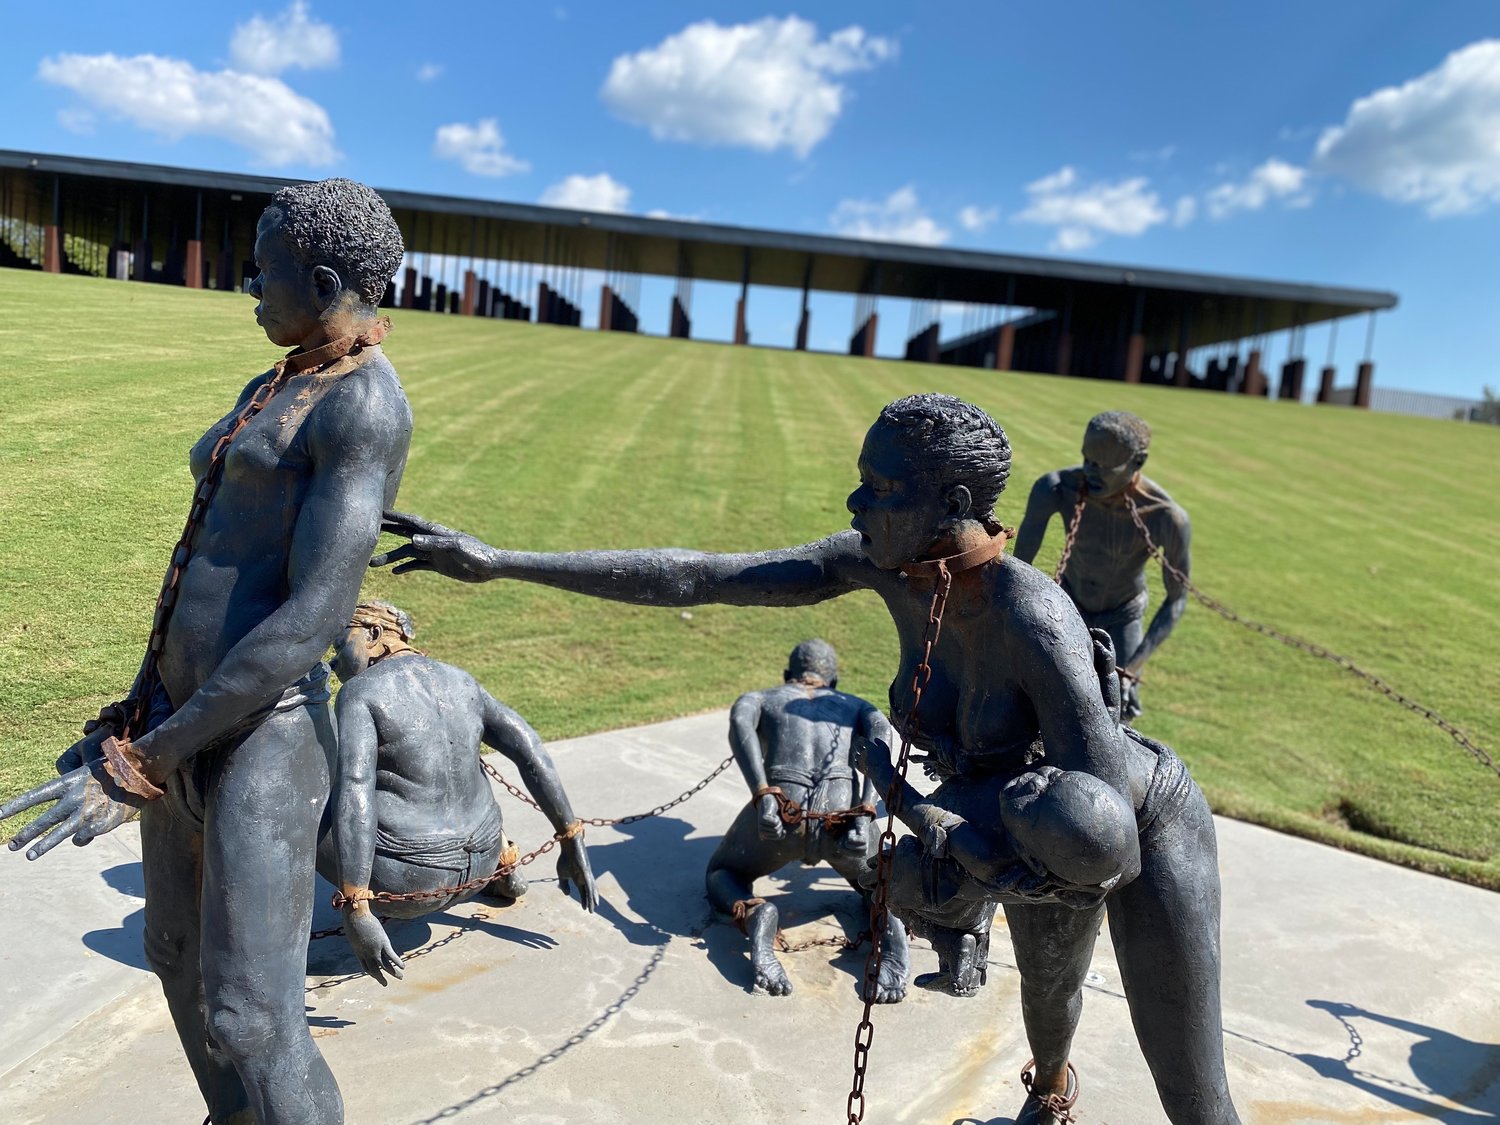 This artistic creation by Kwame Akoto-Bamfo depicts the bondage of slavery. This is part of the National Memorial for Peace and Justice, a six-acre reflection site in Montgomery.